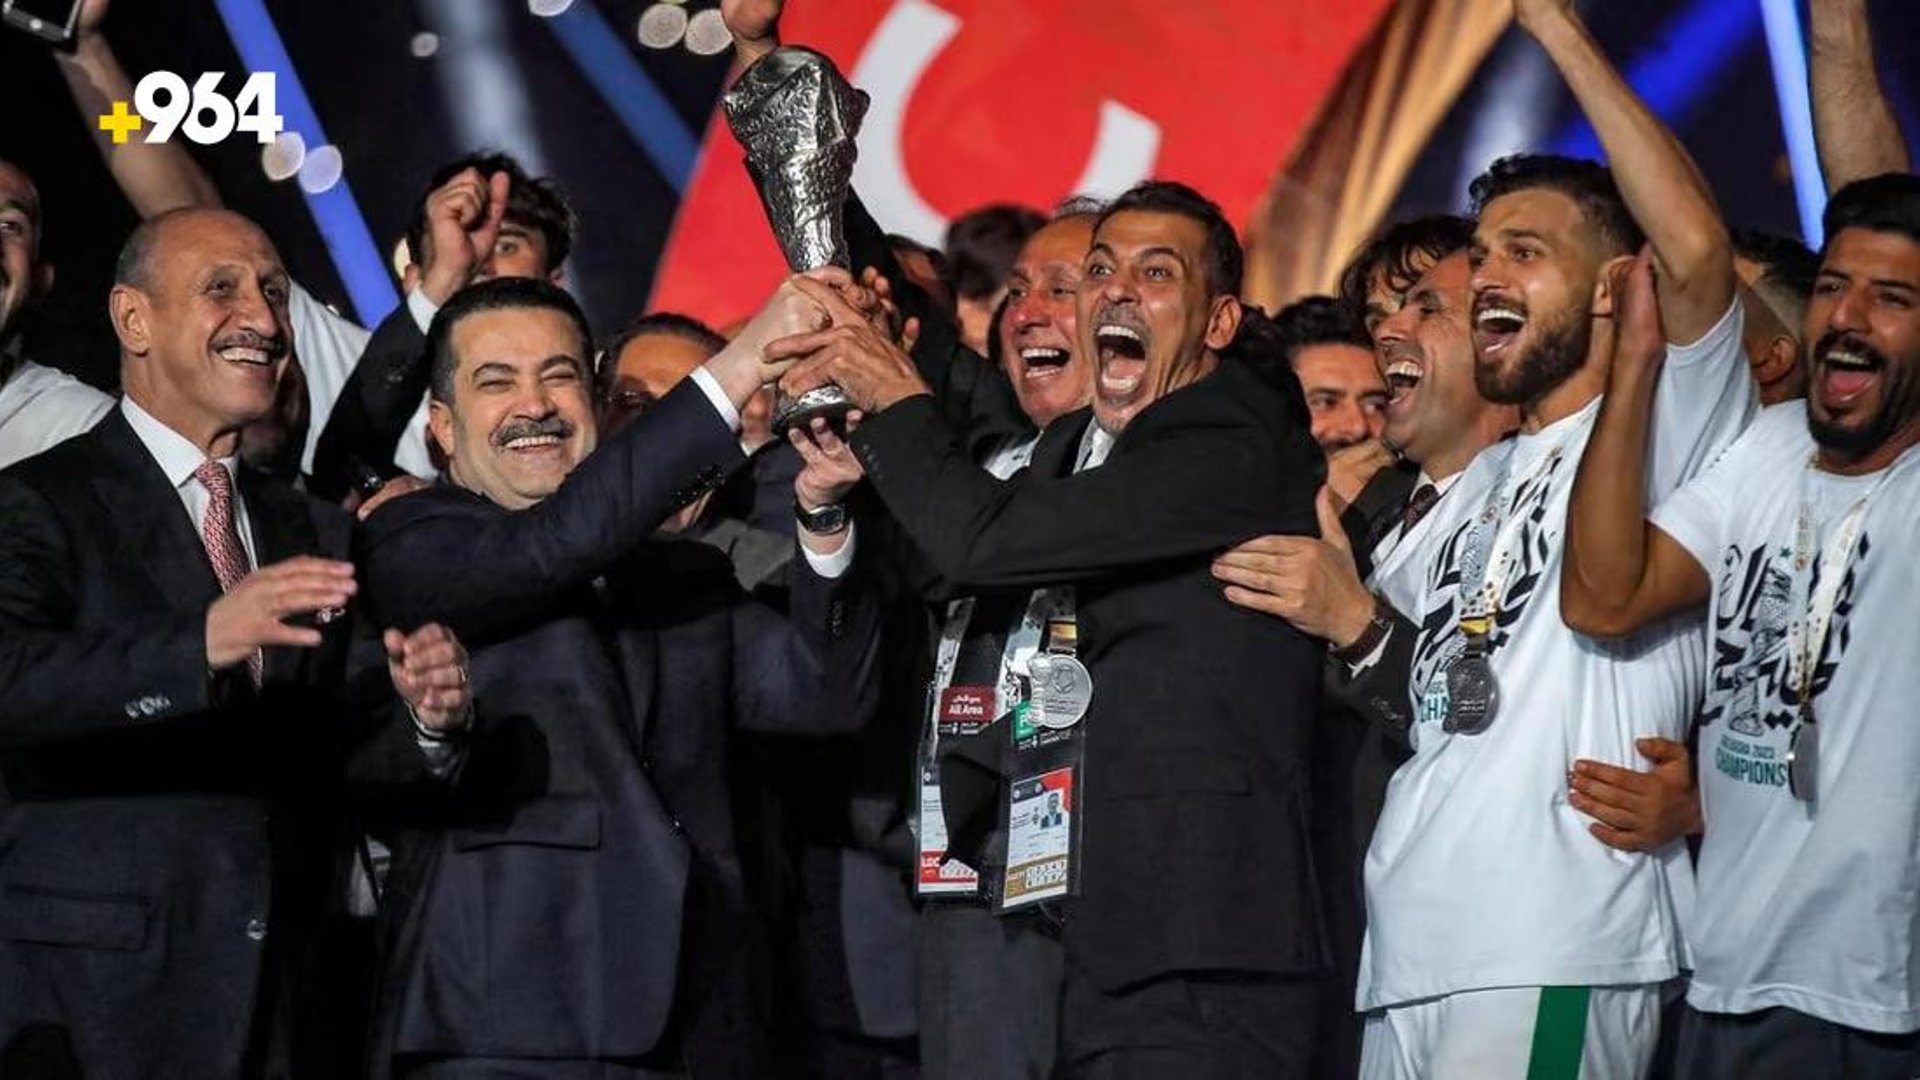 AlSudani congratulated the victory of the Iraqi national team